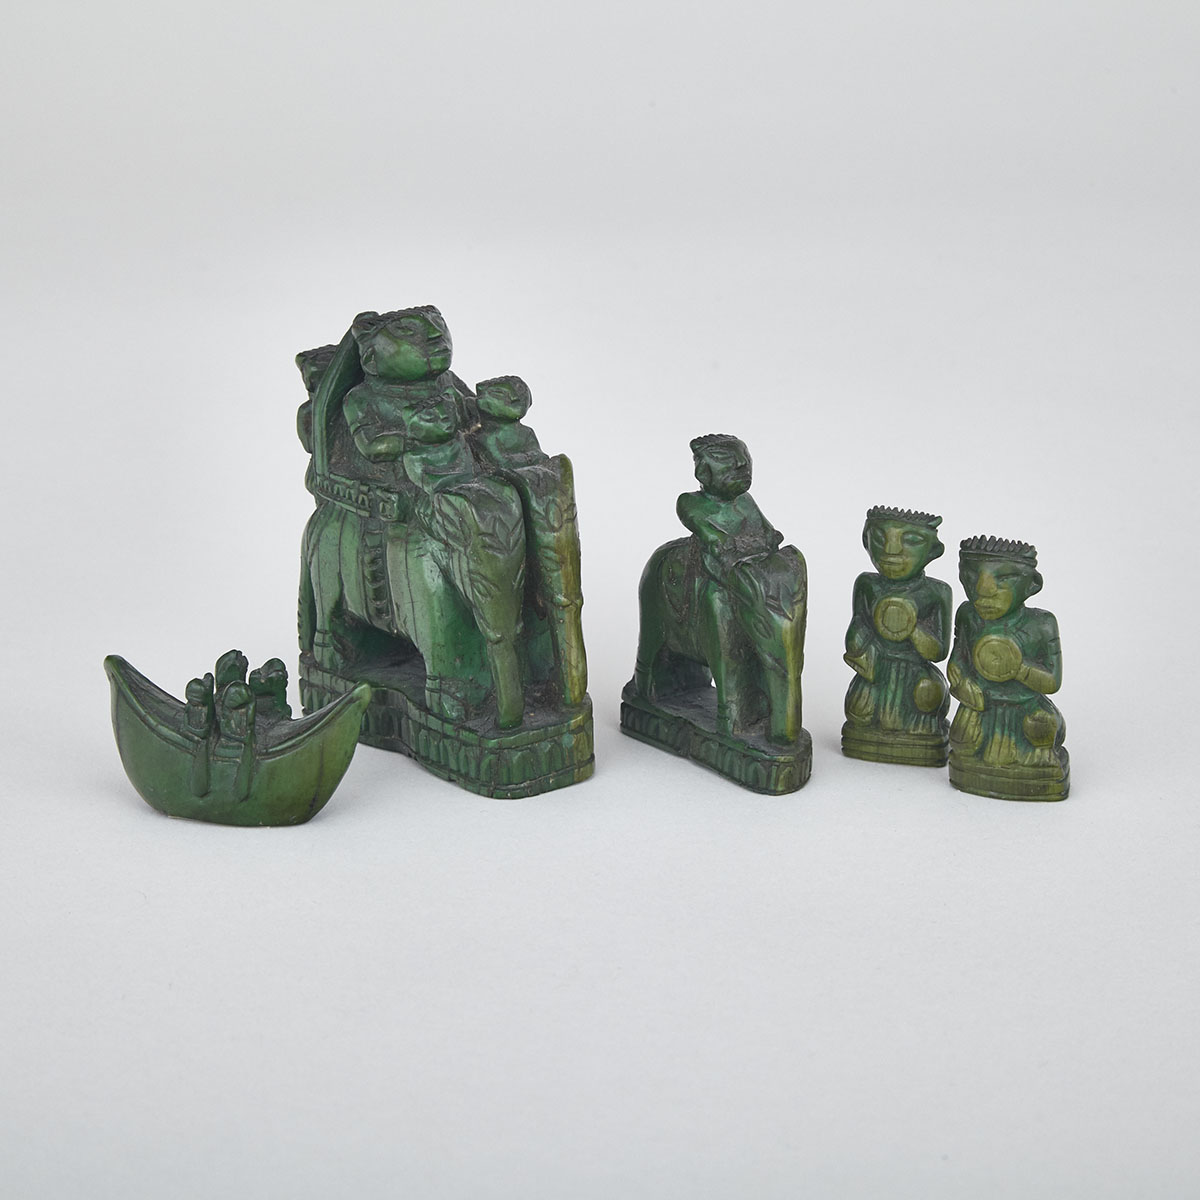 Five Western Indian Green Stained Carved Ivory Chess Pieces, 18th century